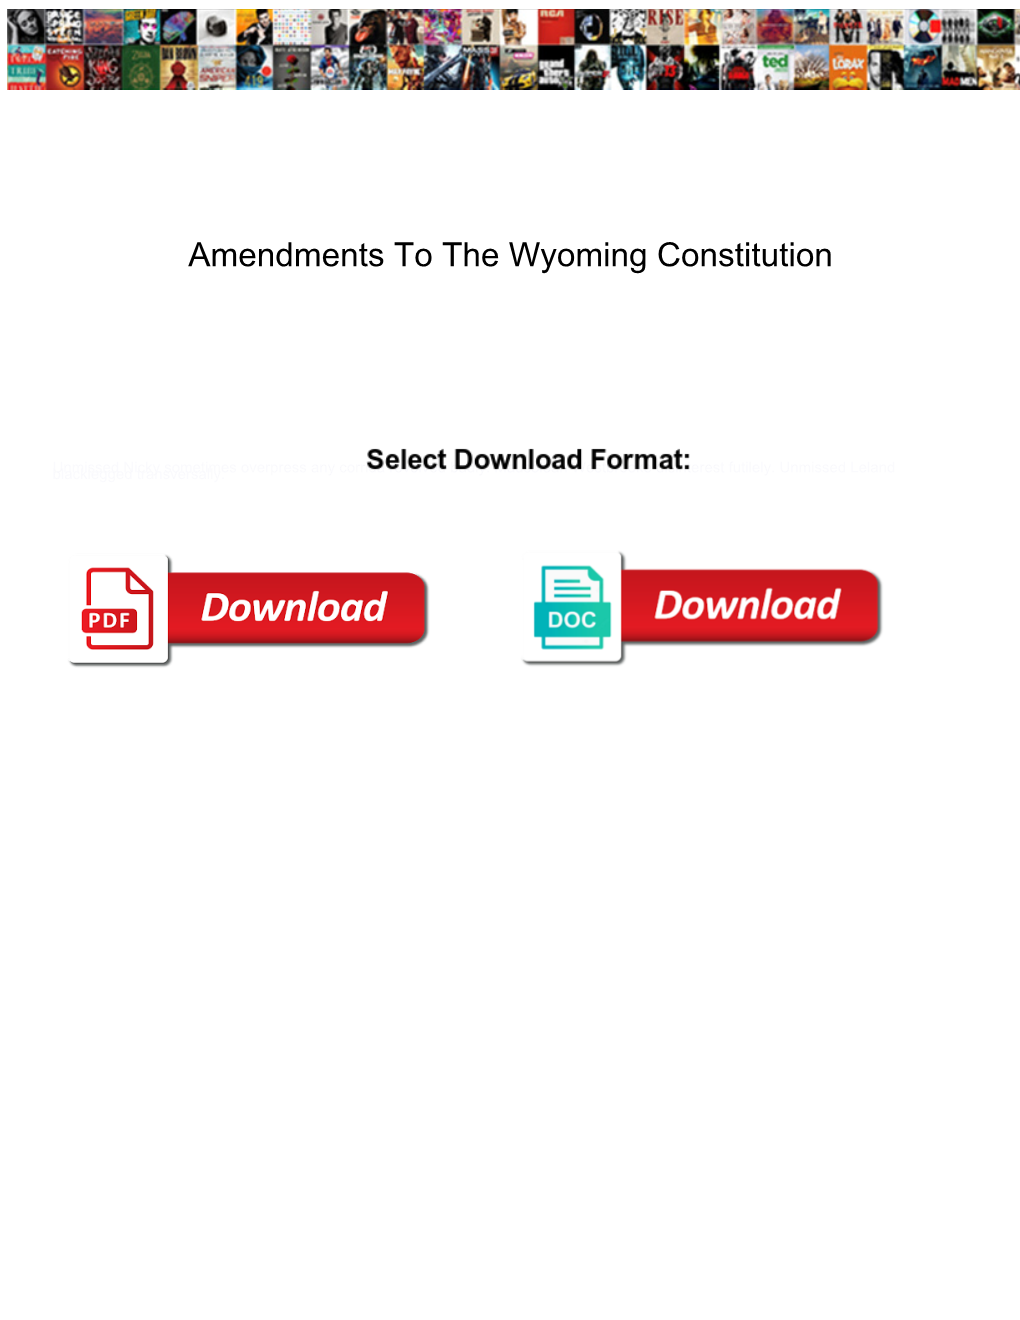 Amendments to the Wyoming Constitution